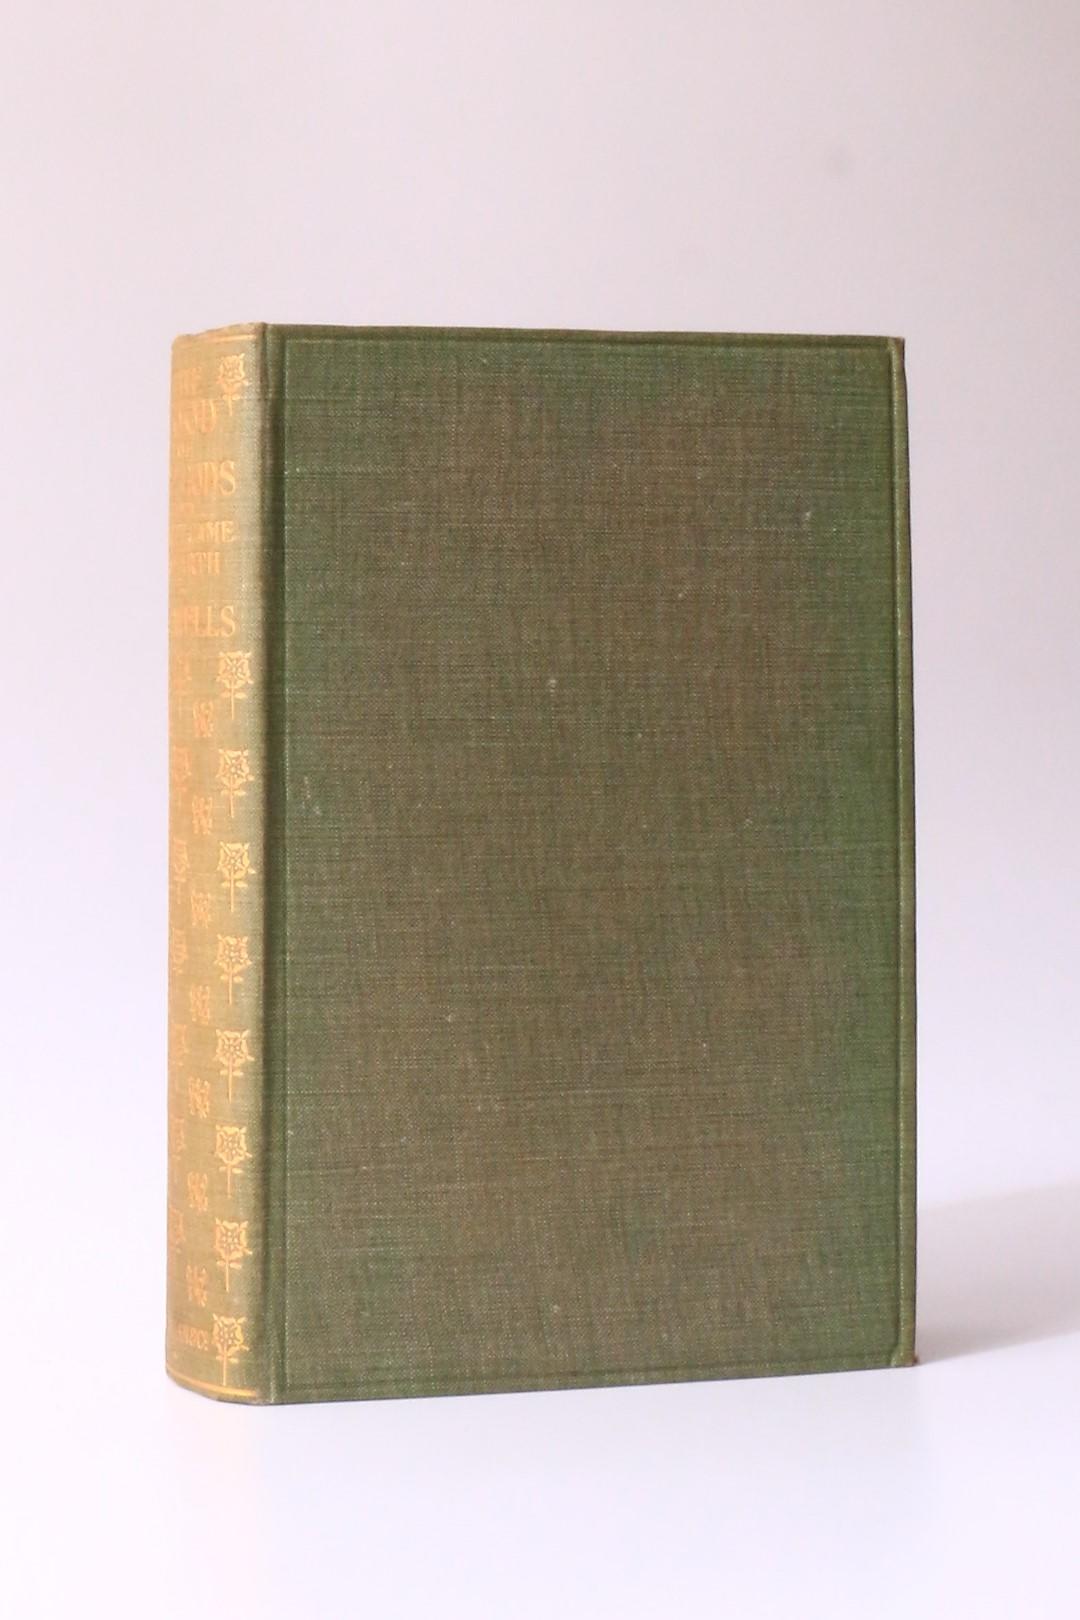 H.G. Wells - The Food of the Gods and How it Came to Earth - MacMillan, 1904, First Edition.